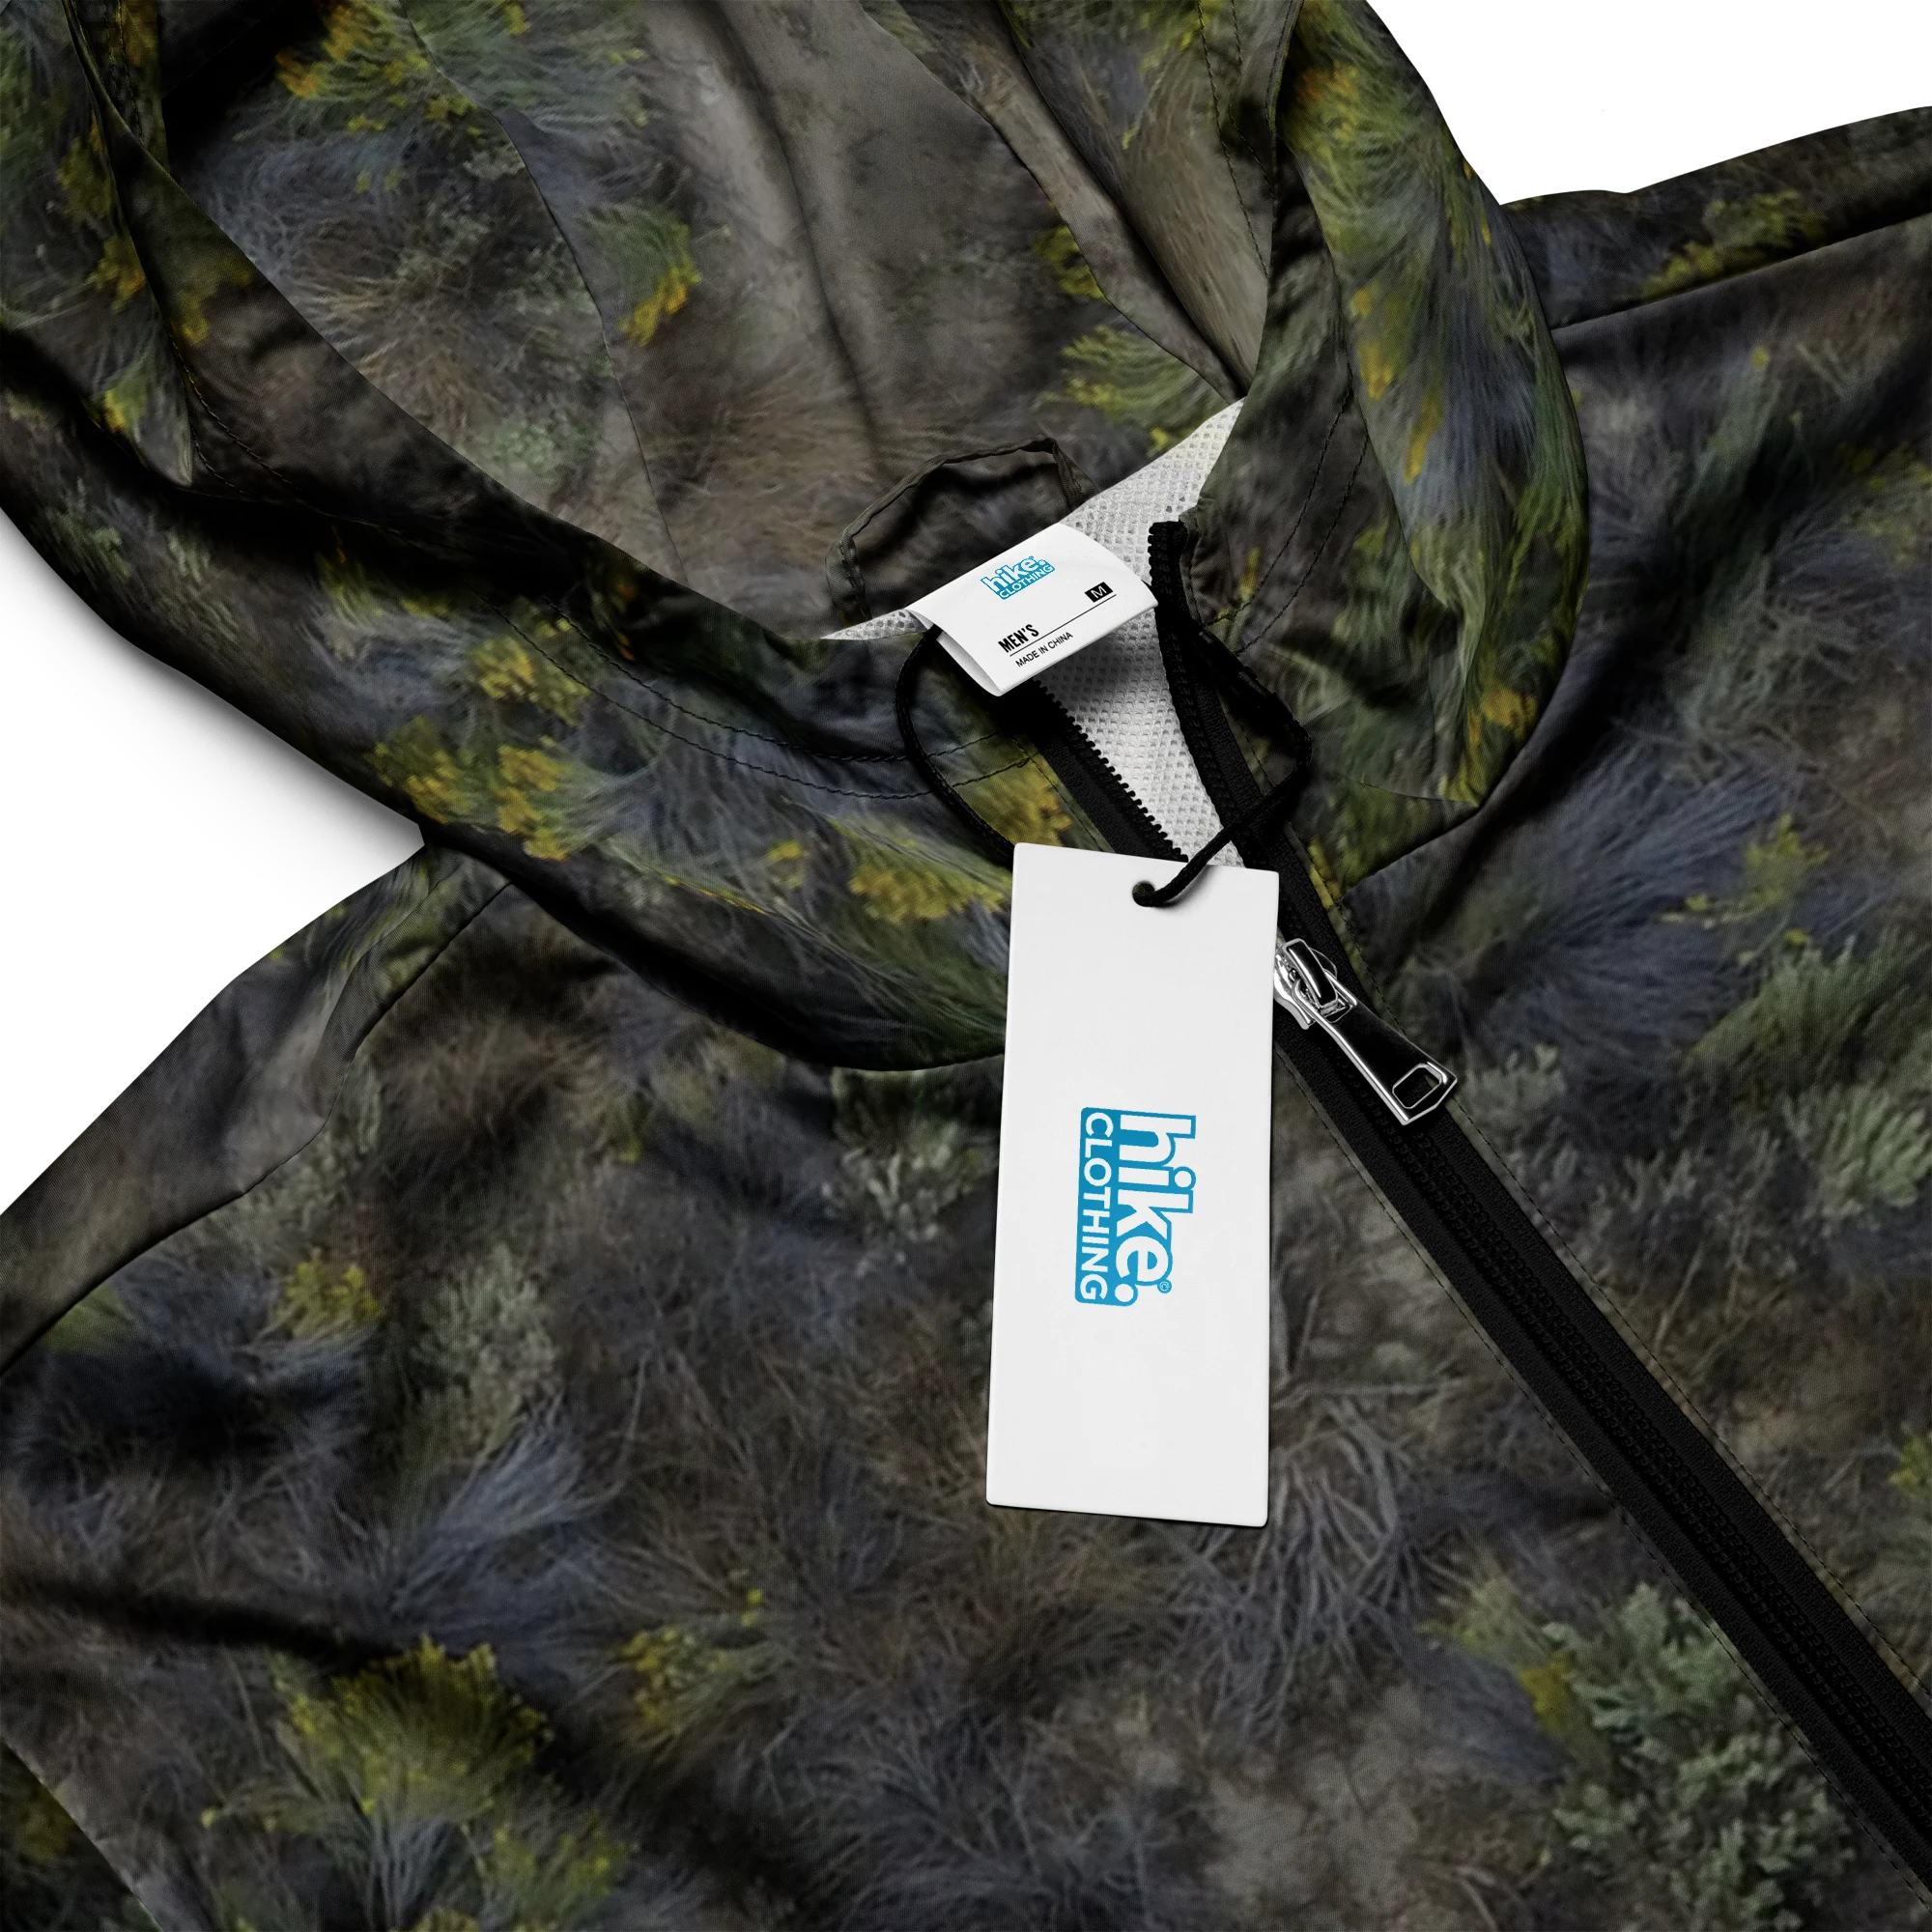 Hike Drone Camo Brand, Pattern and Product Design